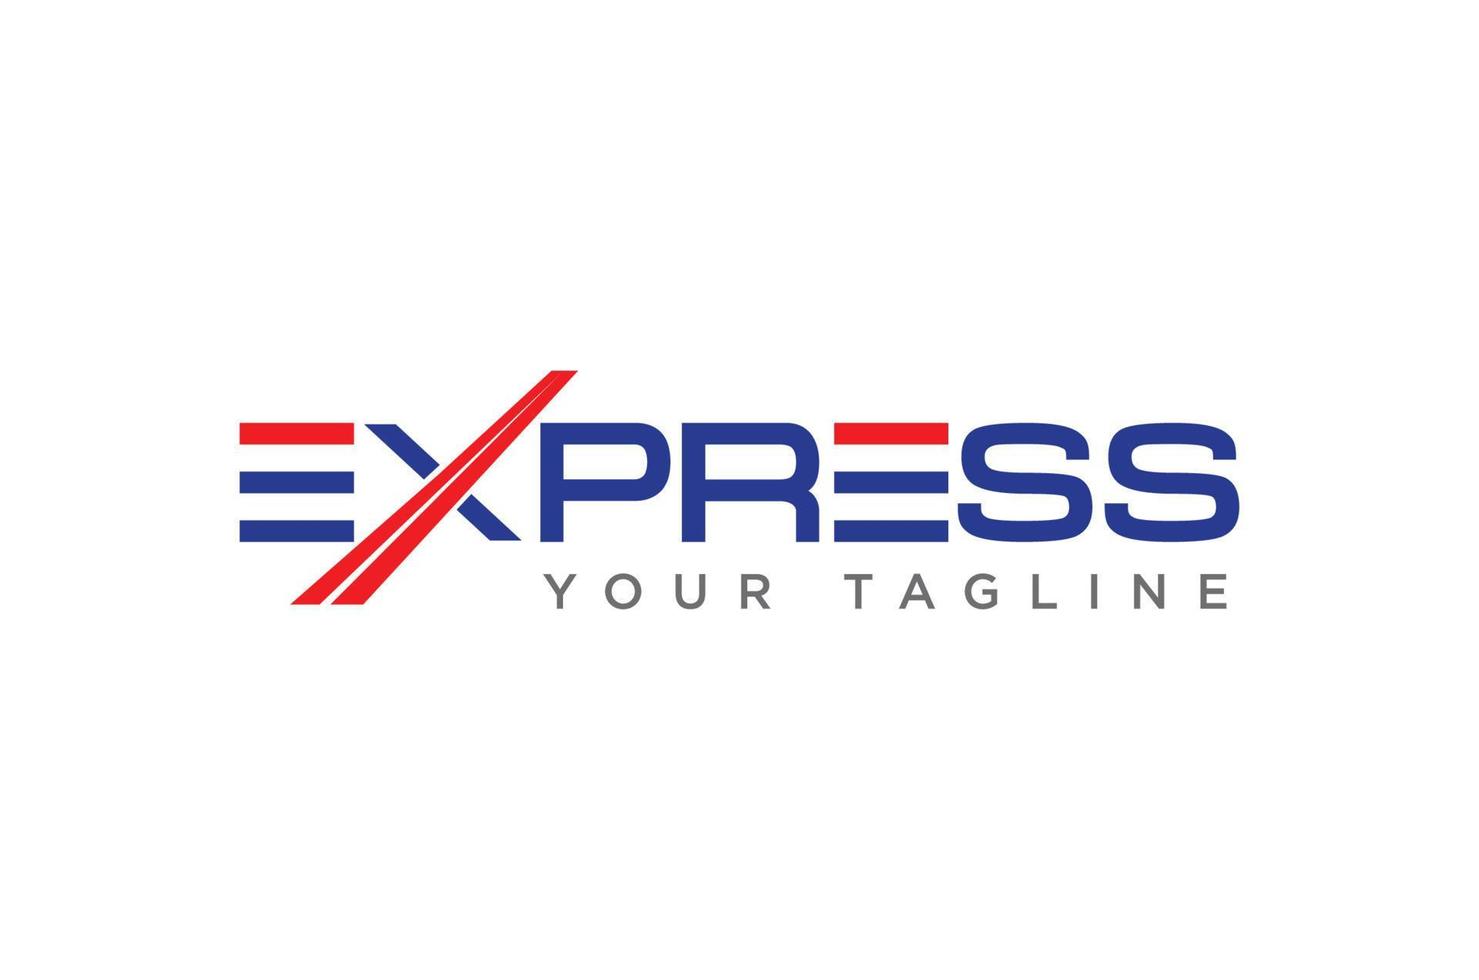 An Express Letter Logo Design Concepts Can Be Used For Express Delivery Or Transport Business vector